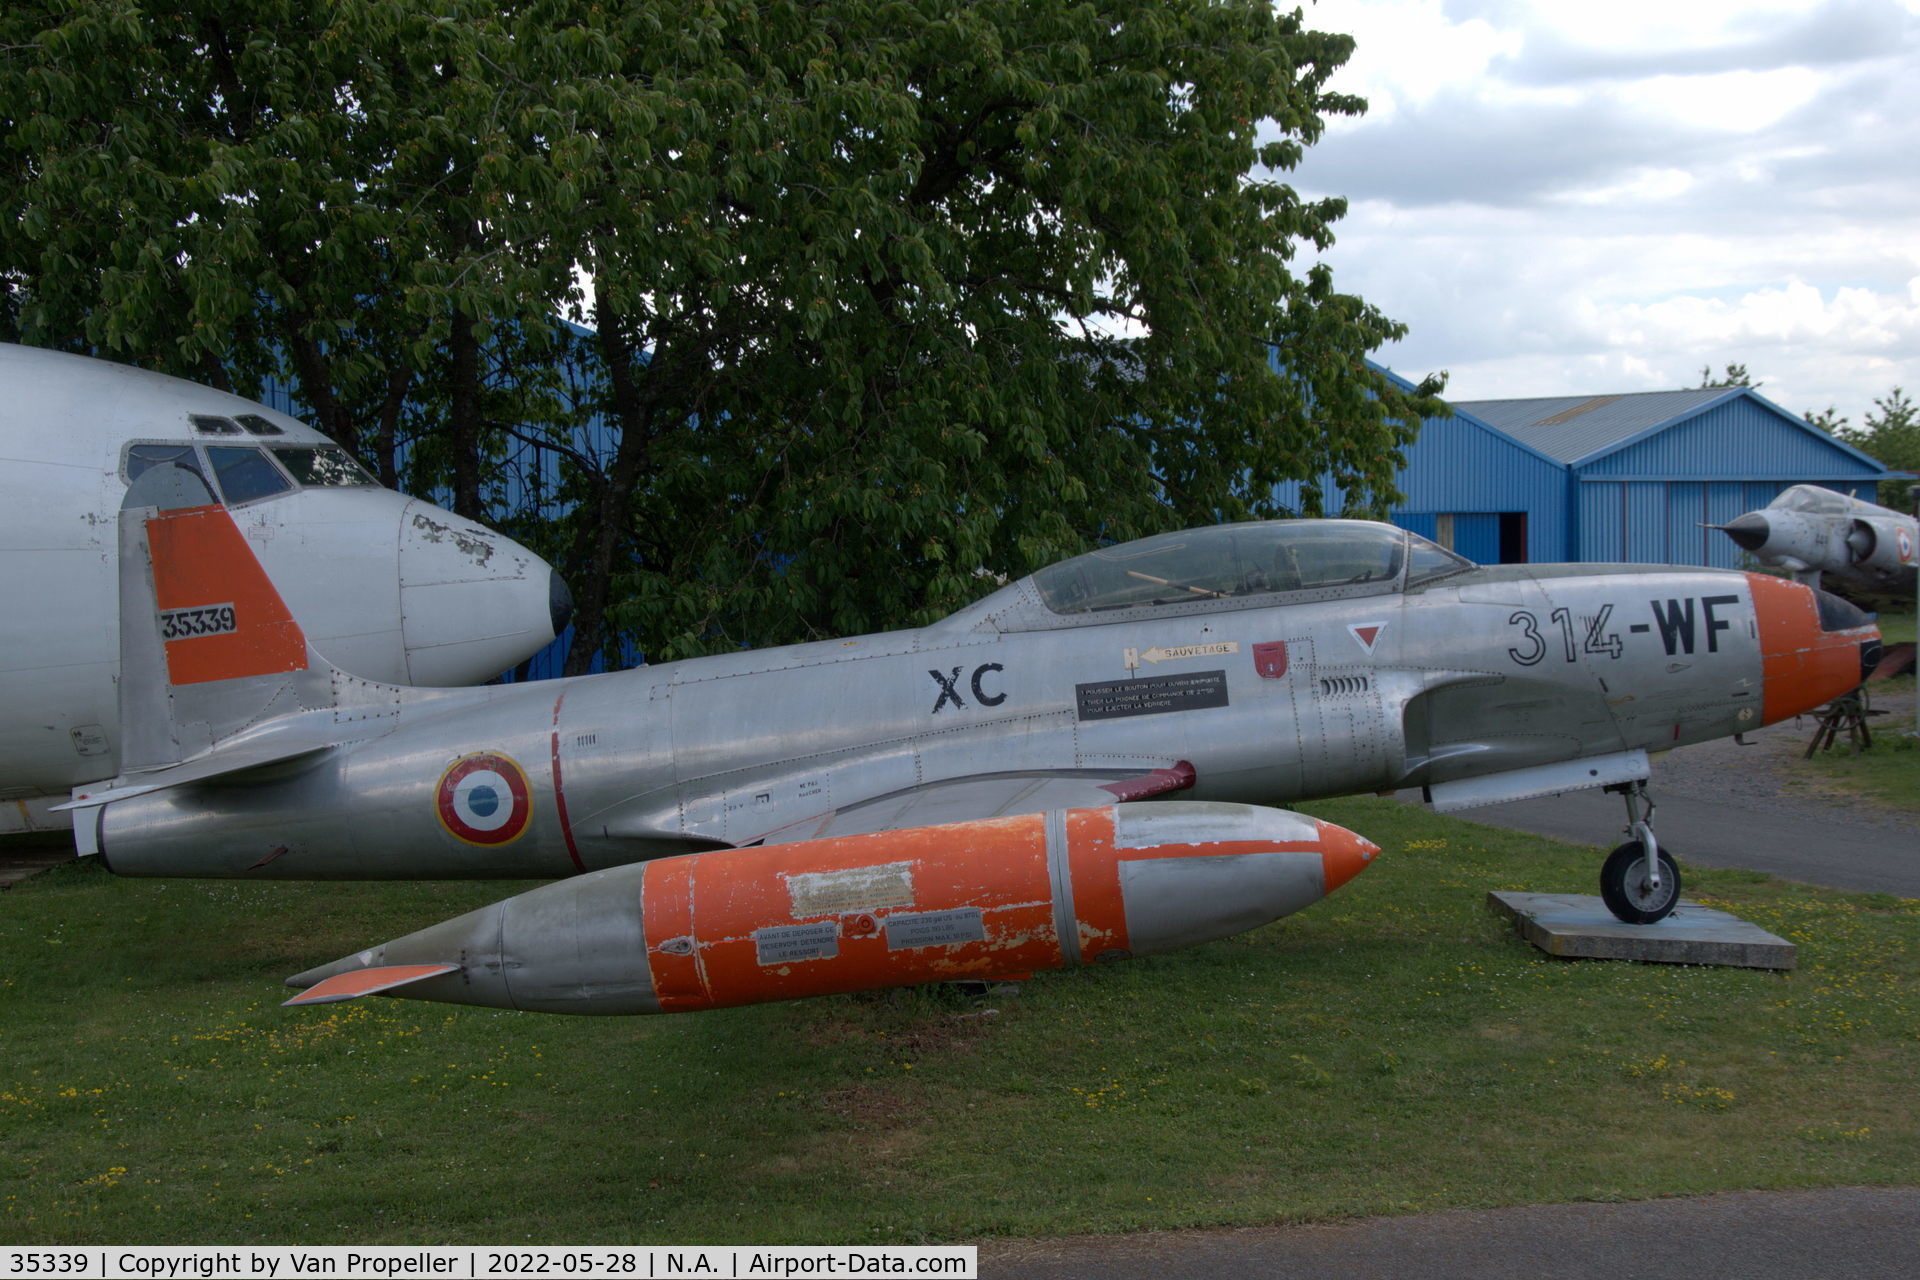 35339, 1953 Lockheed T-33A Shooting Star C/N 580-8678, Lockheed T-33A of the French Air Force in the Industrie and Aviation Museum in Albert, France, 2022